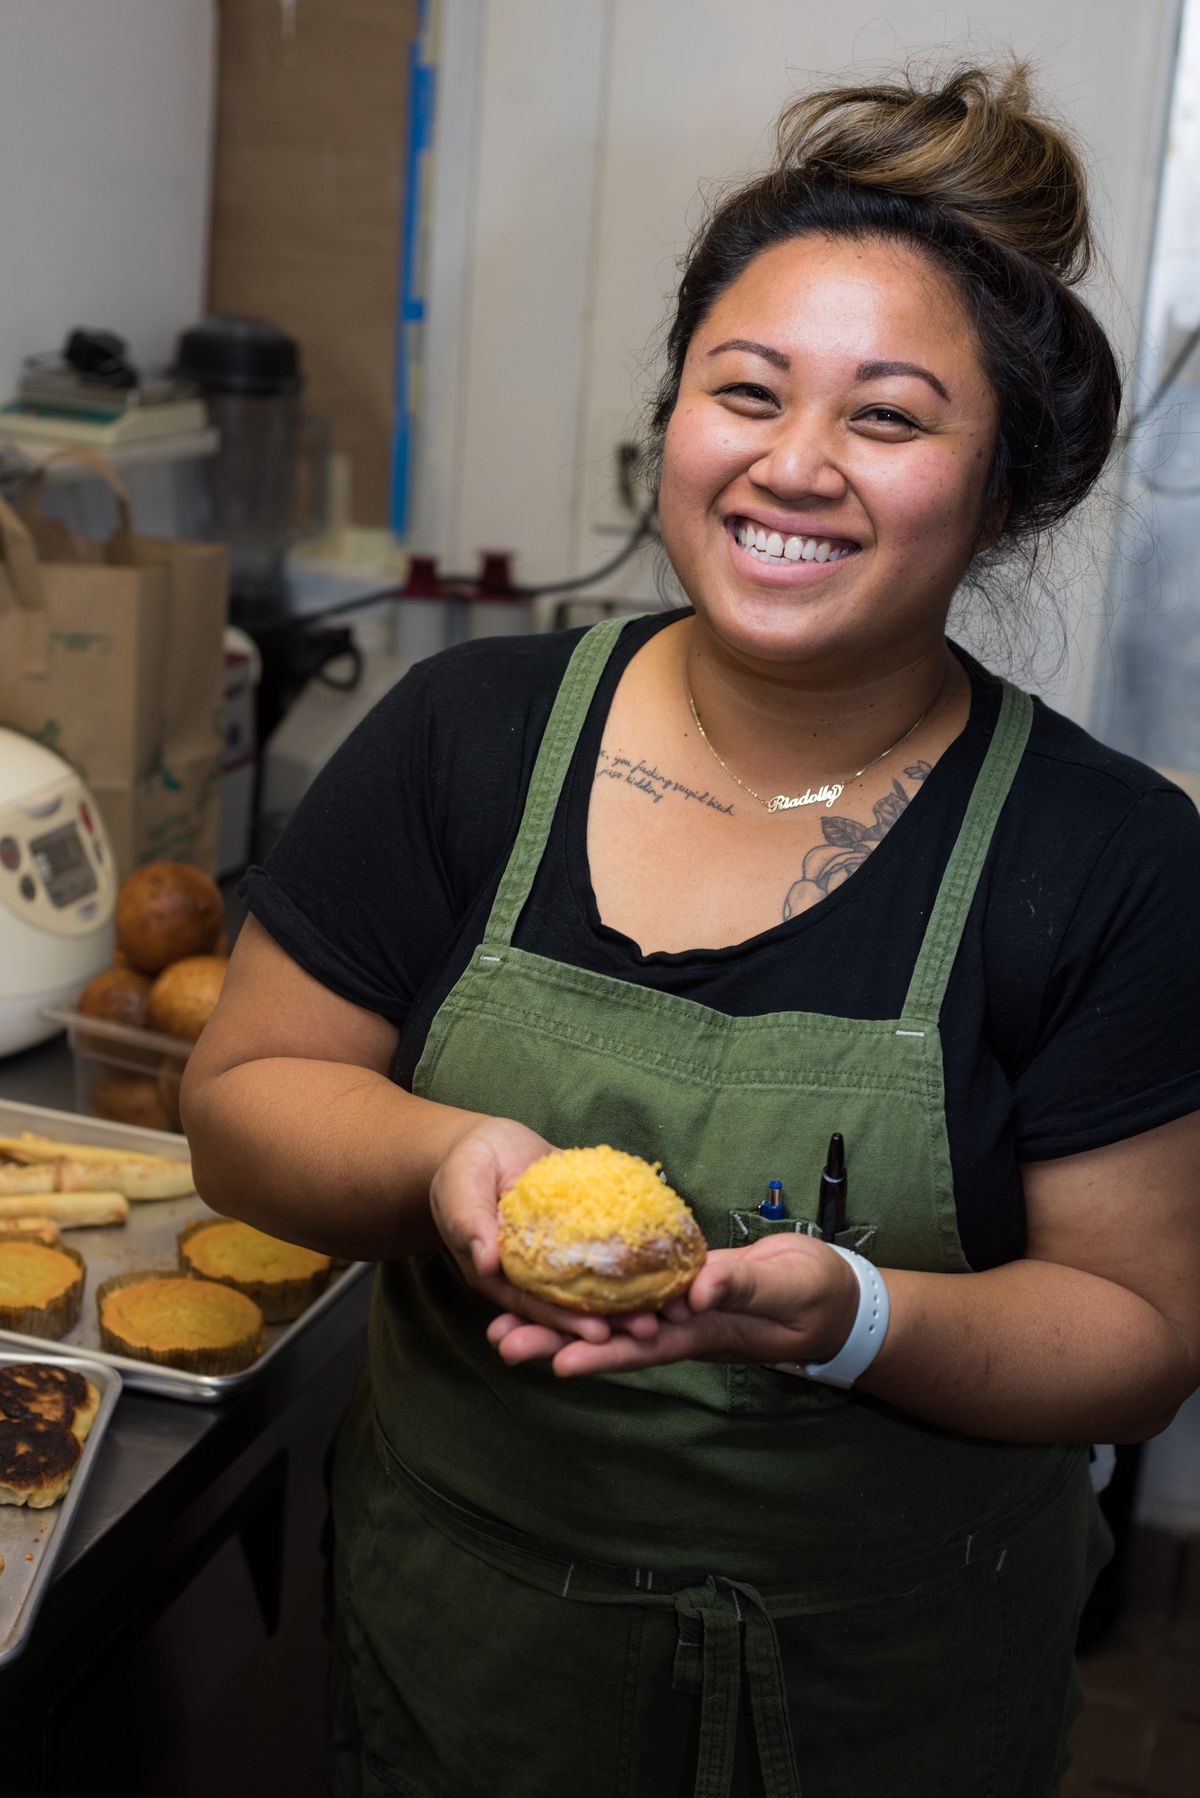 Ria Barbosa at her Downtown LA restaurant Petite Peso holding a Filipino pastry.